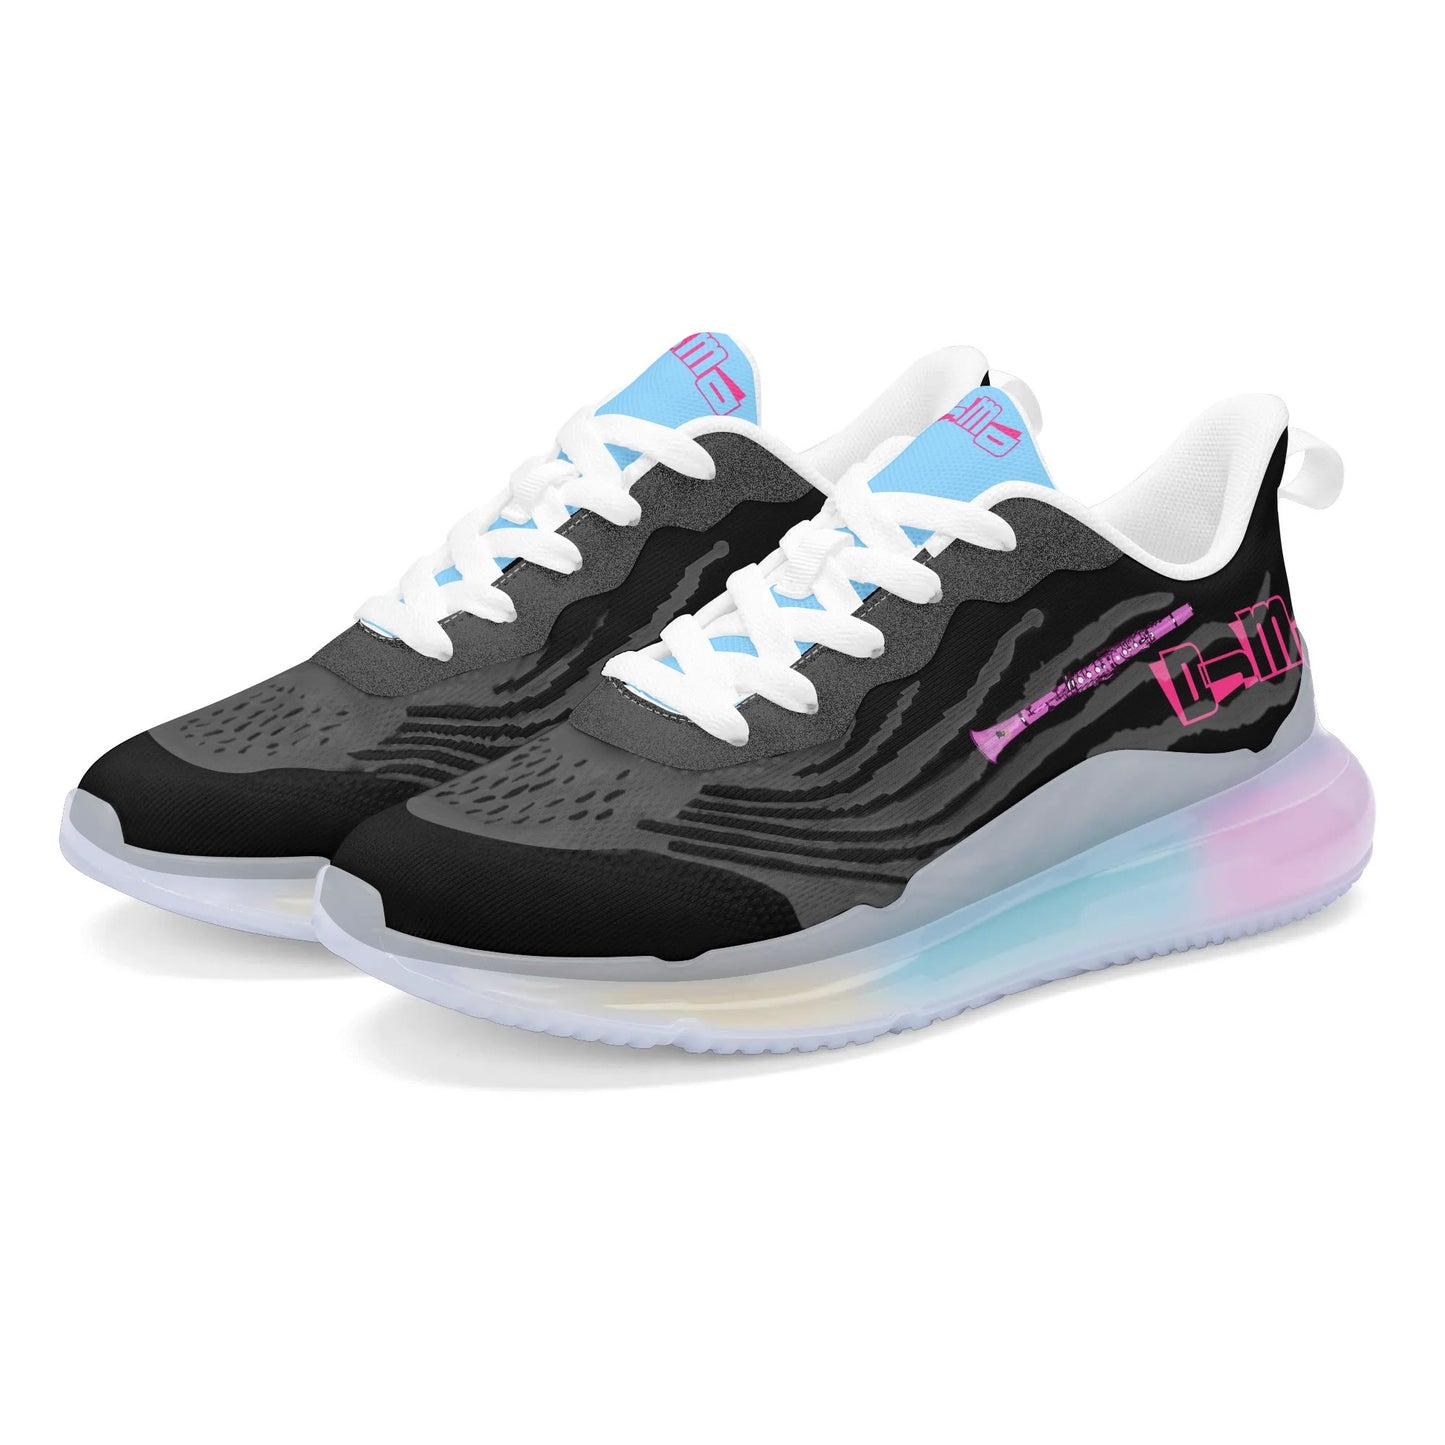 Dnt Juge My Different Womens Rainbow Atmospheric Cushion Running Shoes